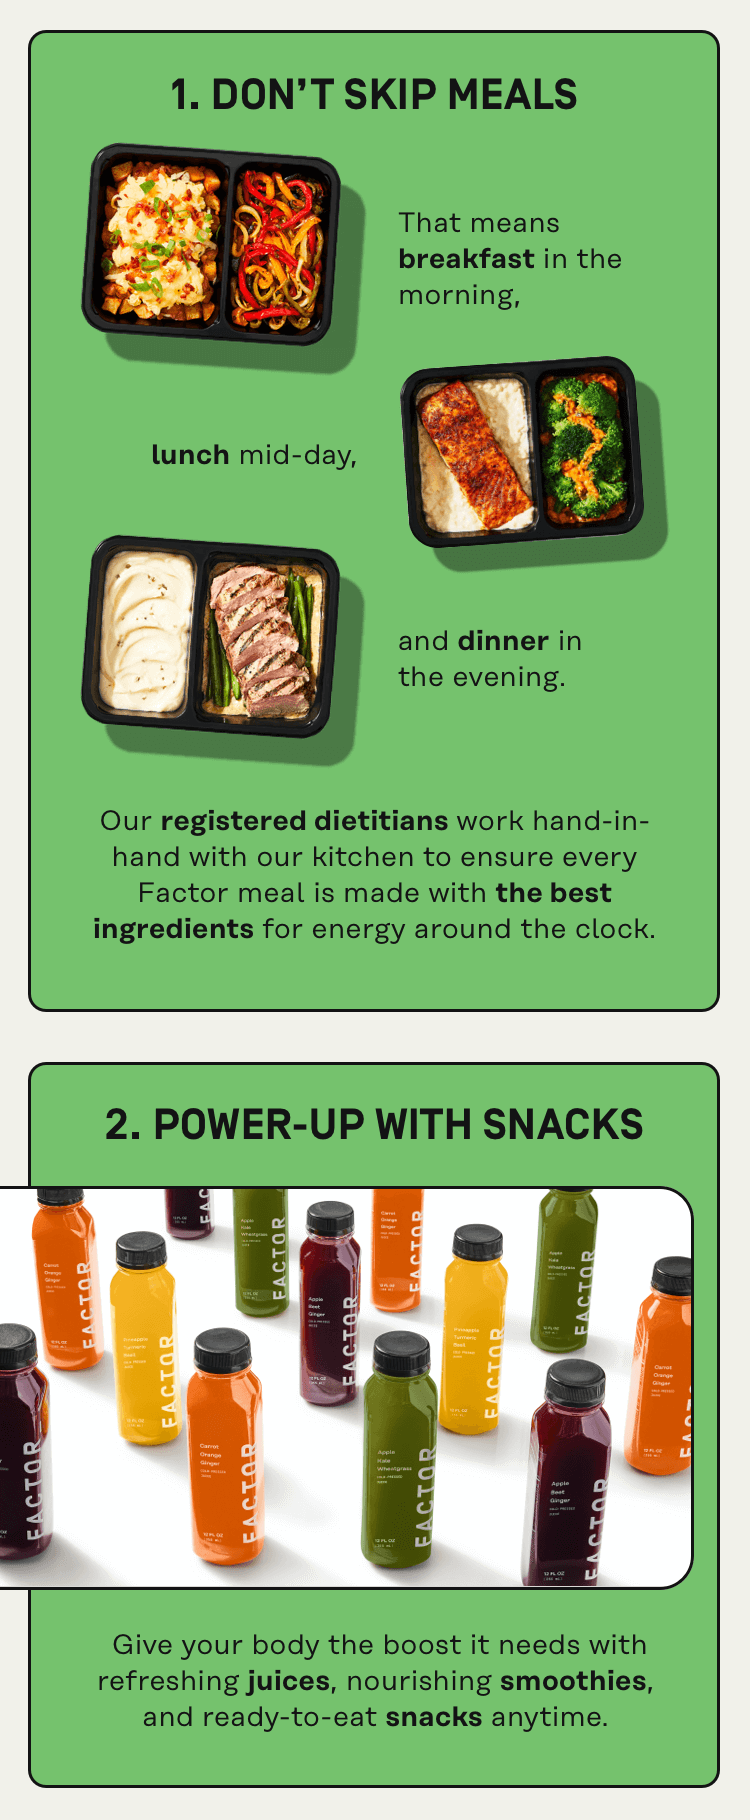 Don't skip meals, Power-up with snacks